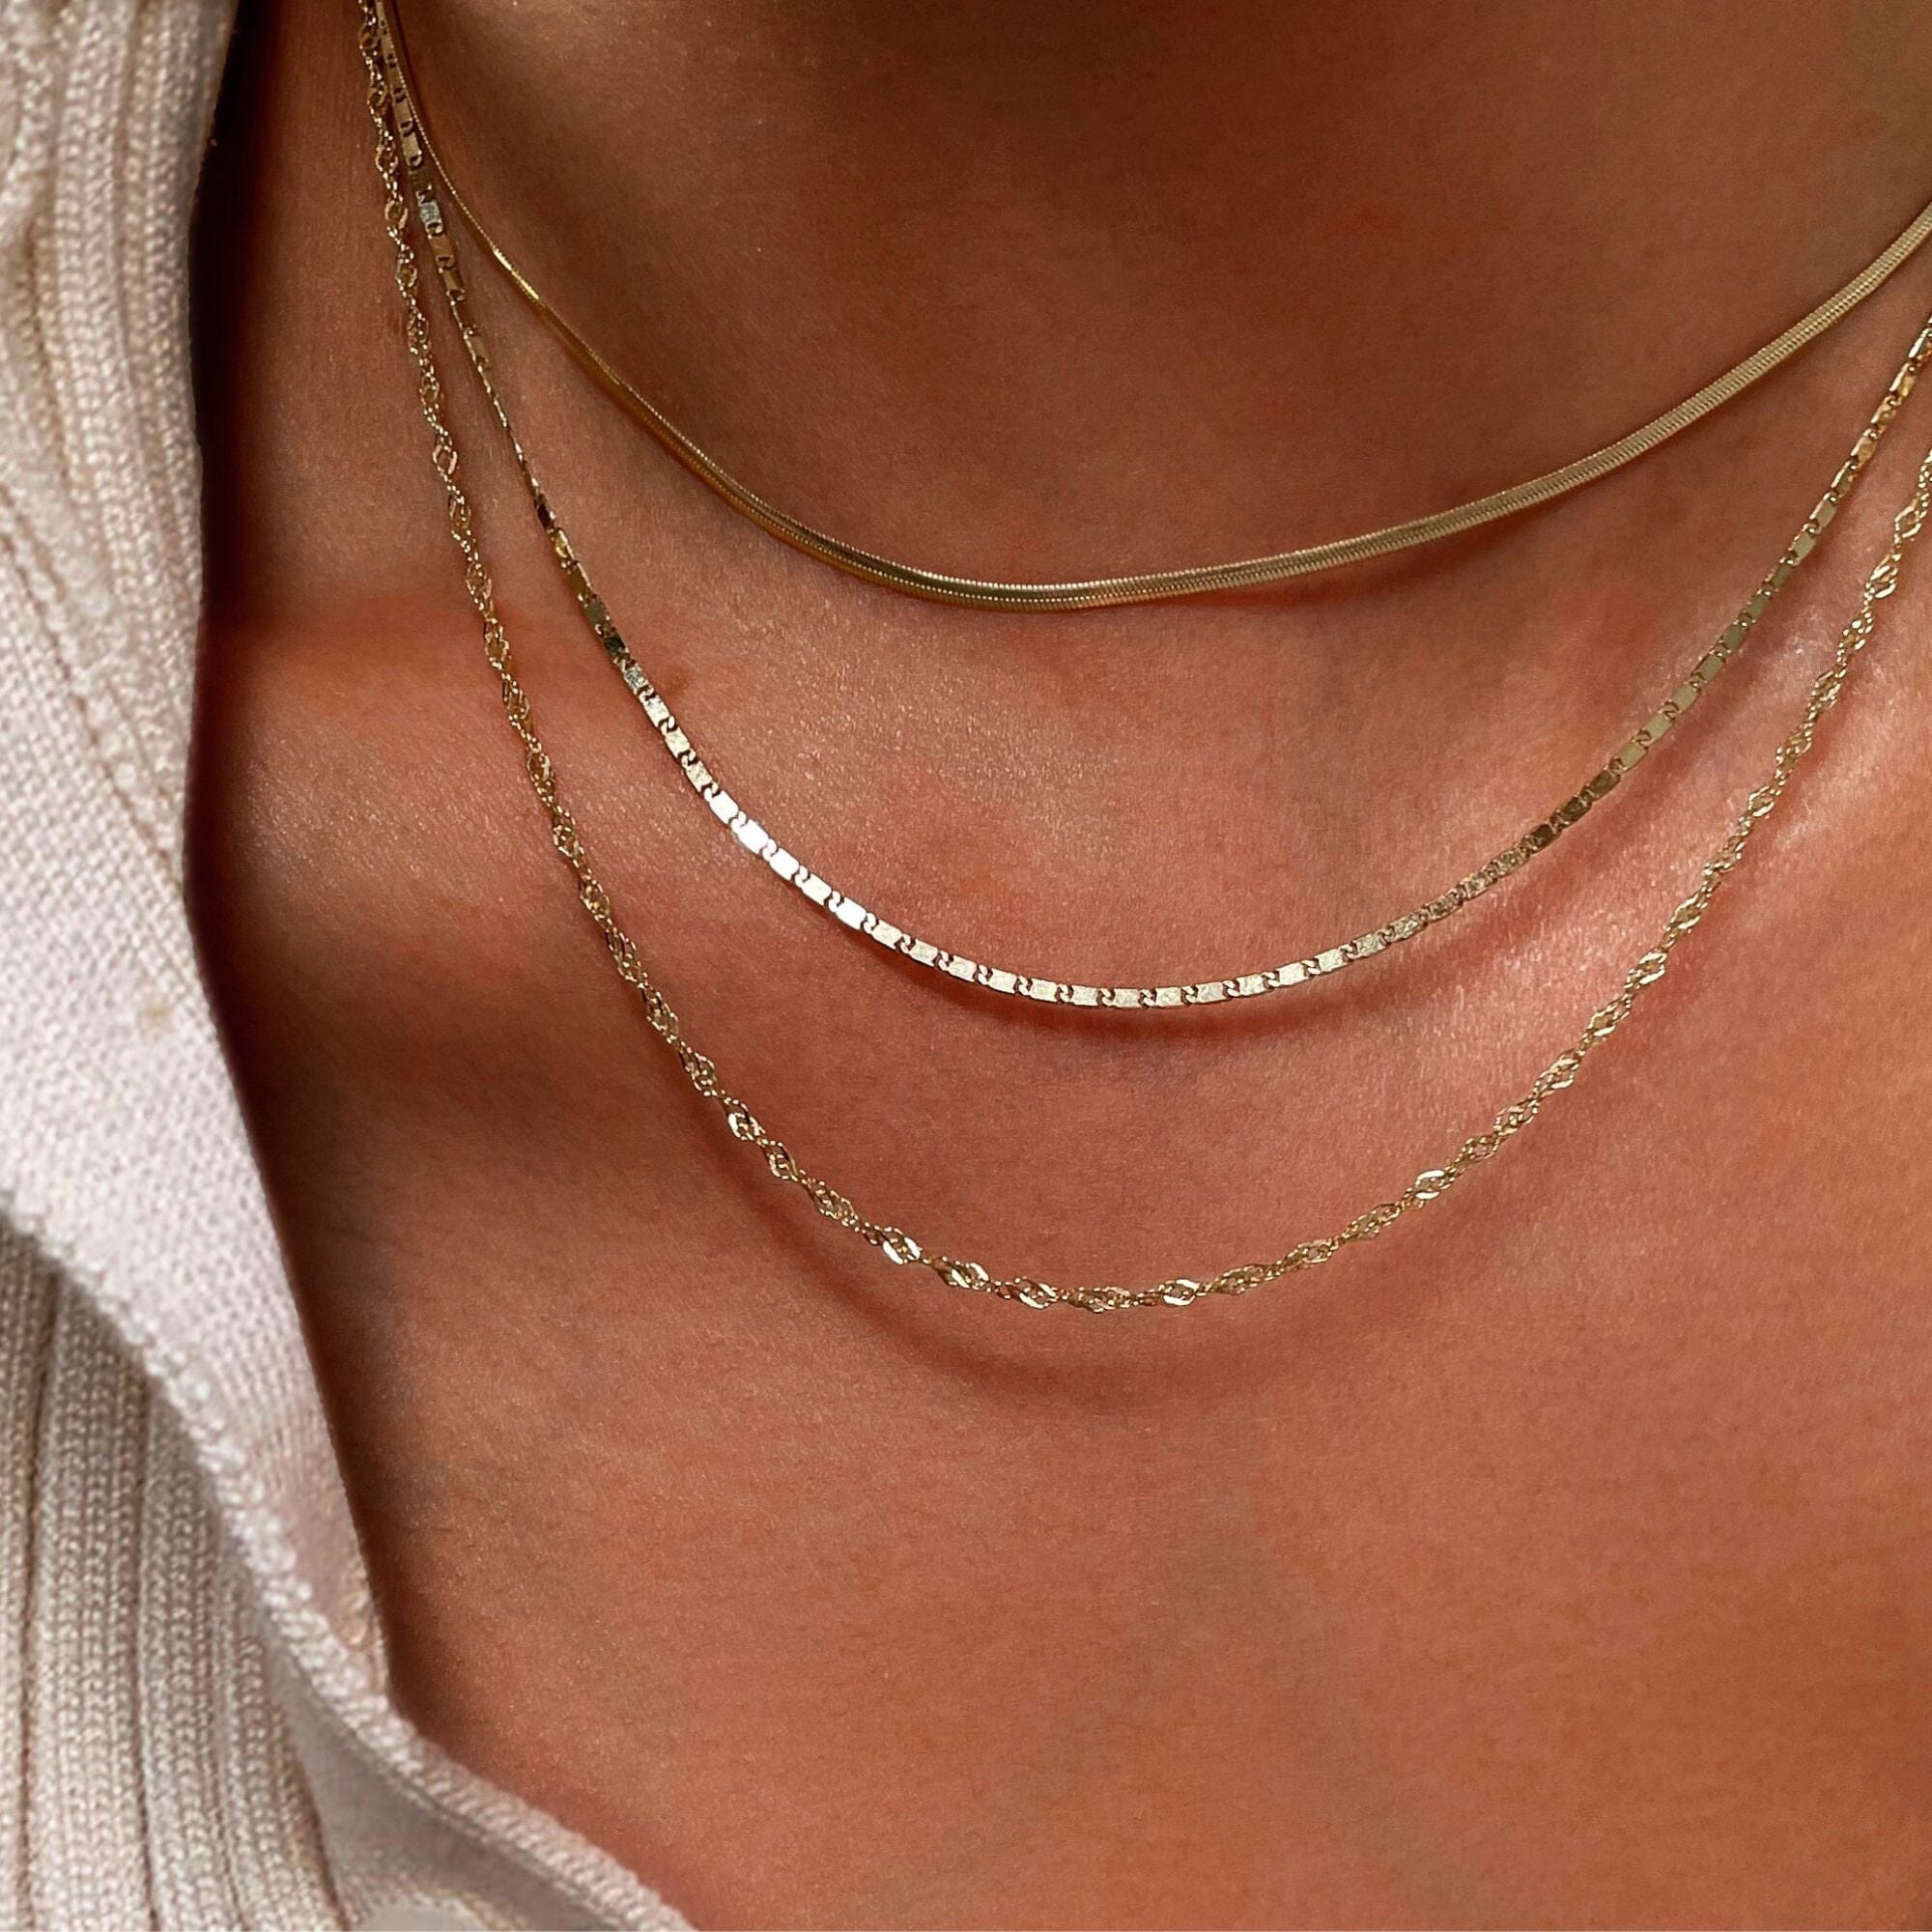 Gold Plated Stainless Steel Thick Twist Chain Necklace | Chain necklace,  Necklace, Waterproof jewelry